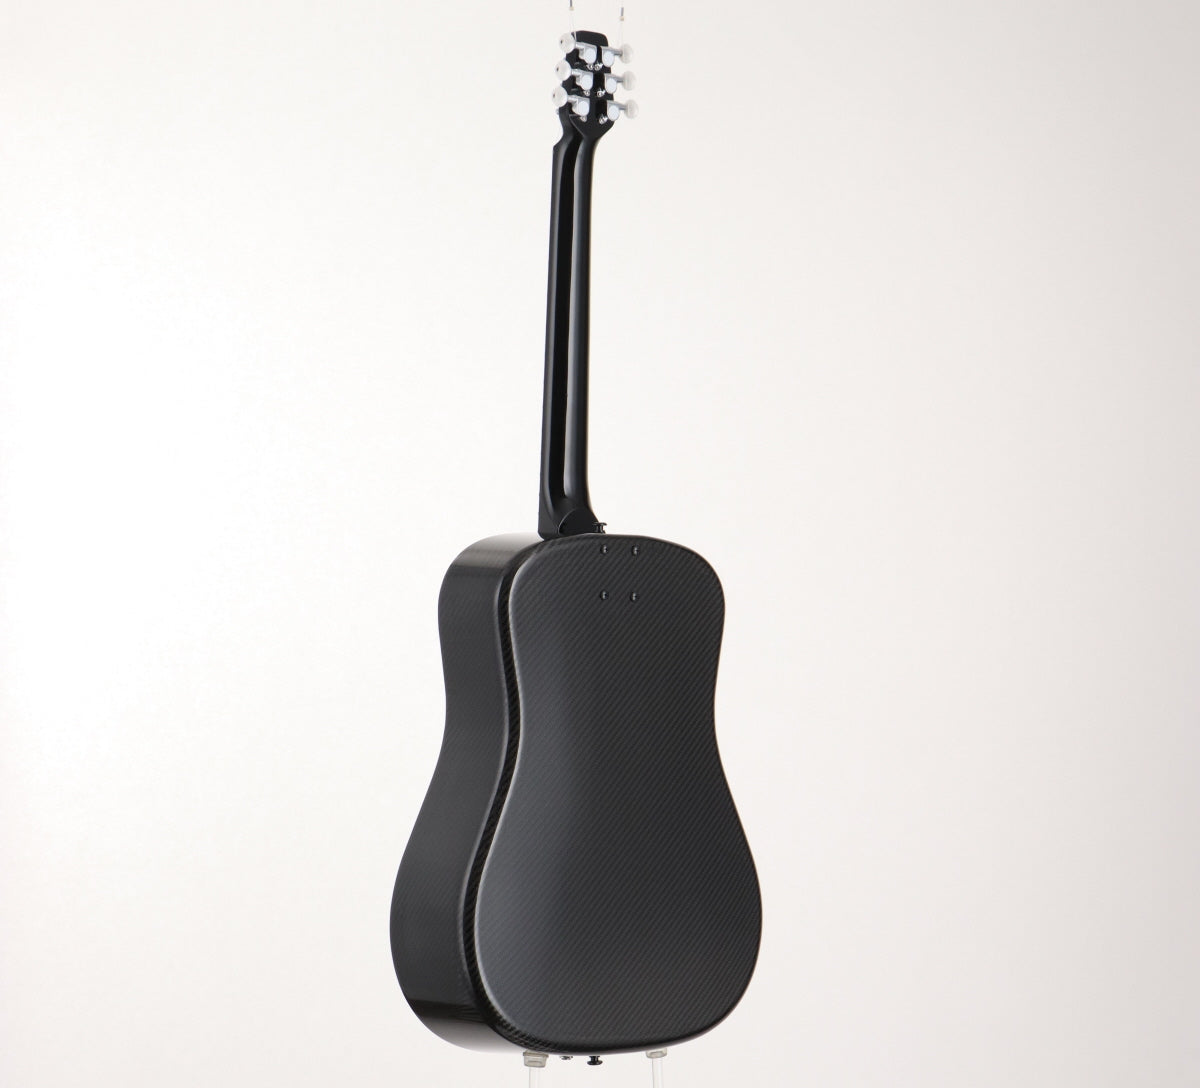 [SN 154551] USED Klos / HYBRID FULL SIZE acoustic-electric [03]